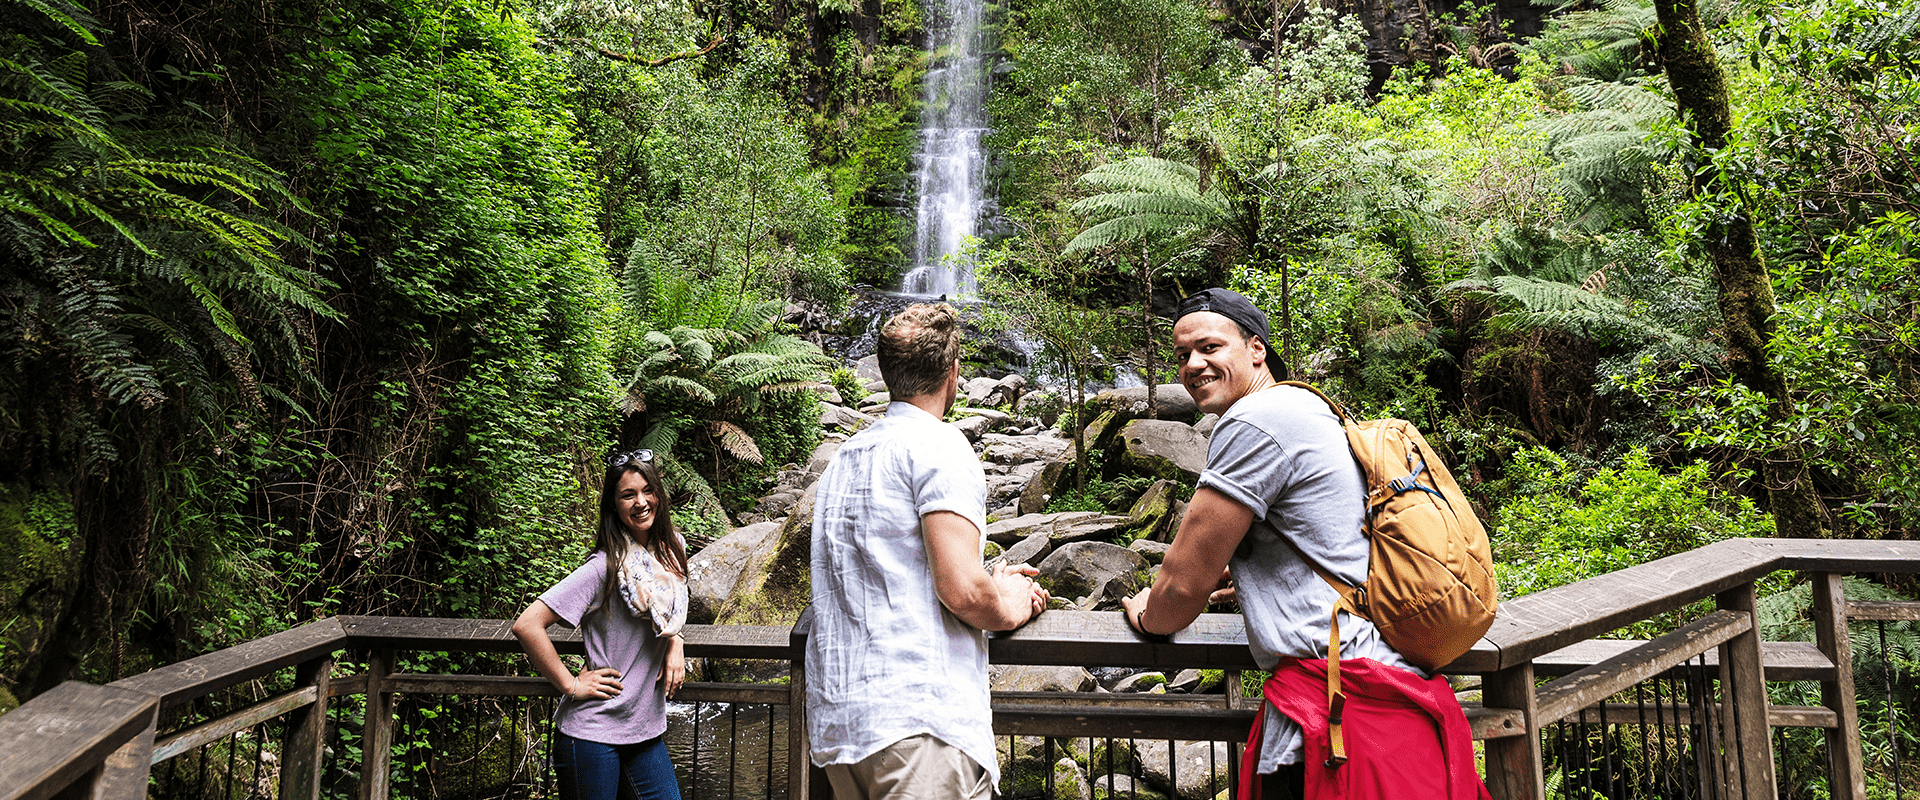 Three visitors stand on a wooden viewing platform admiring the waterfall in lush temperate rainforest environment.